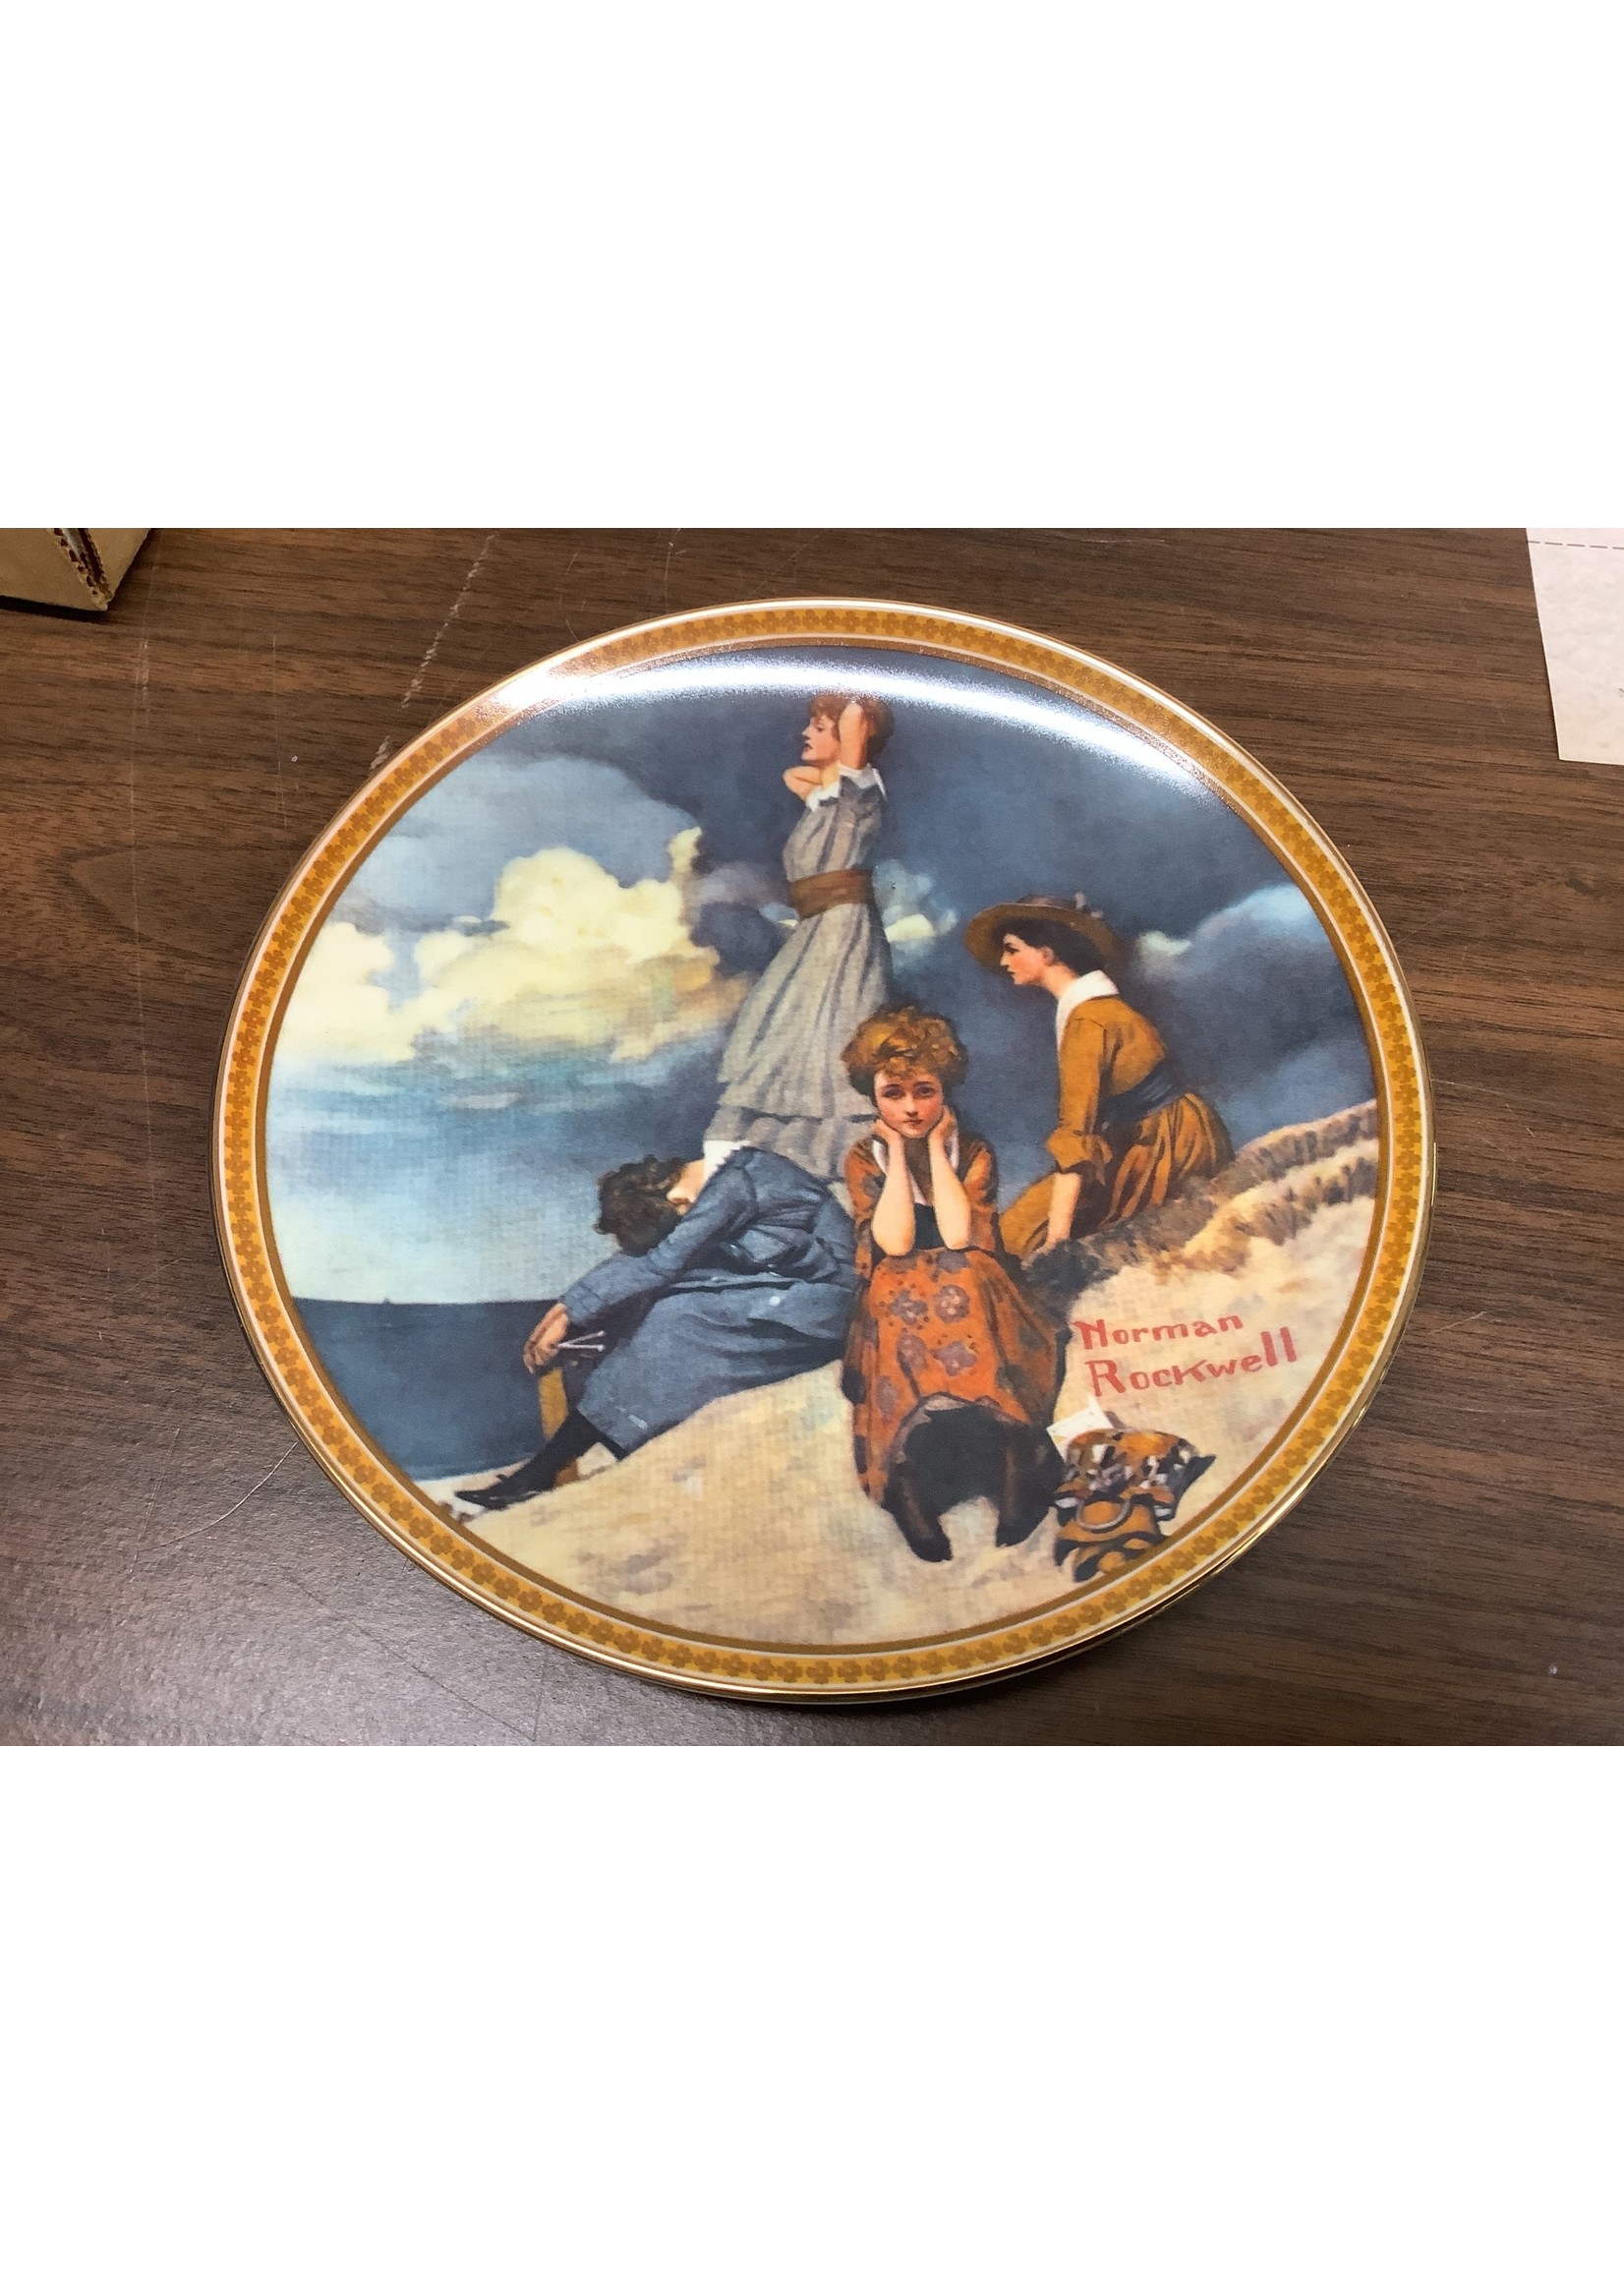 The Bradford Exchange Collectors Plate “Waiting on the Shore” Bradex-No. 84-R70-4.3